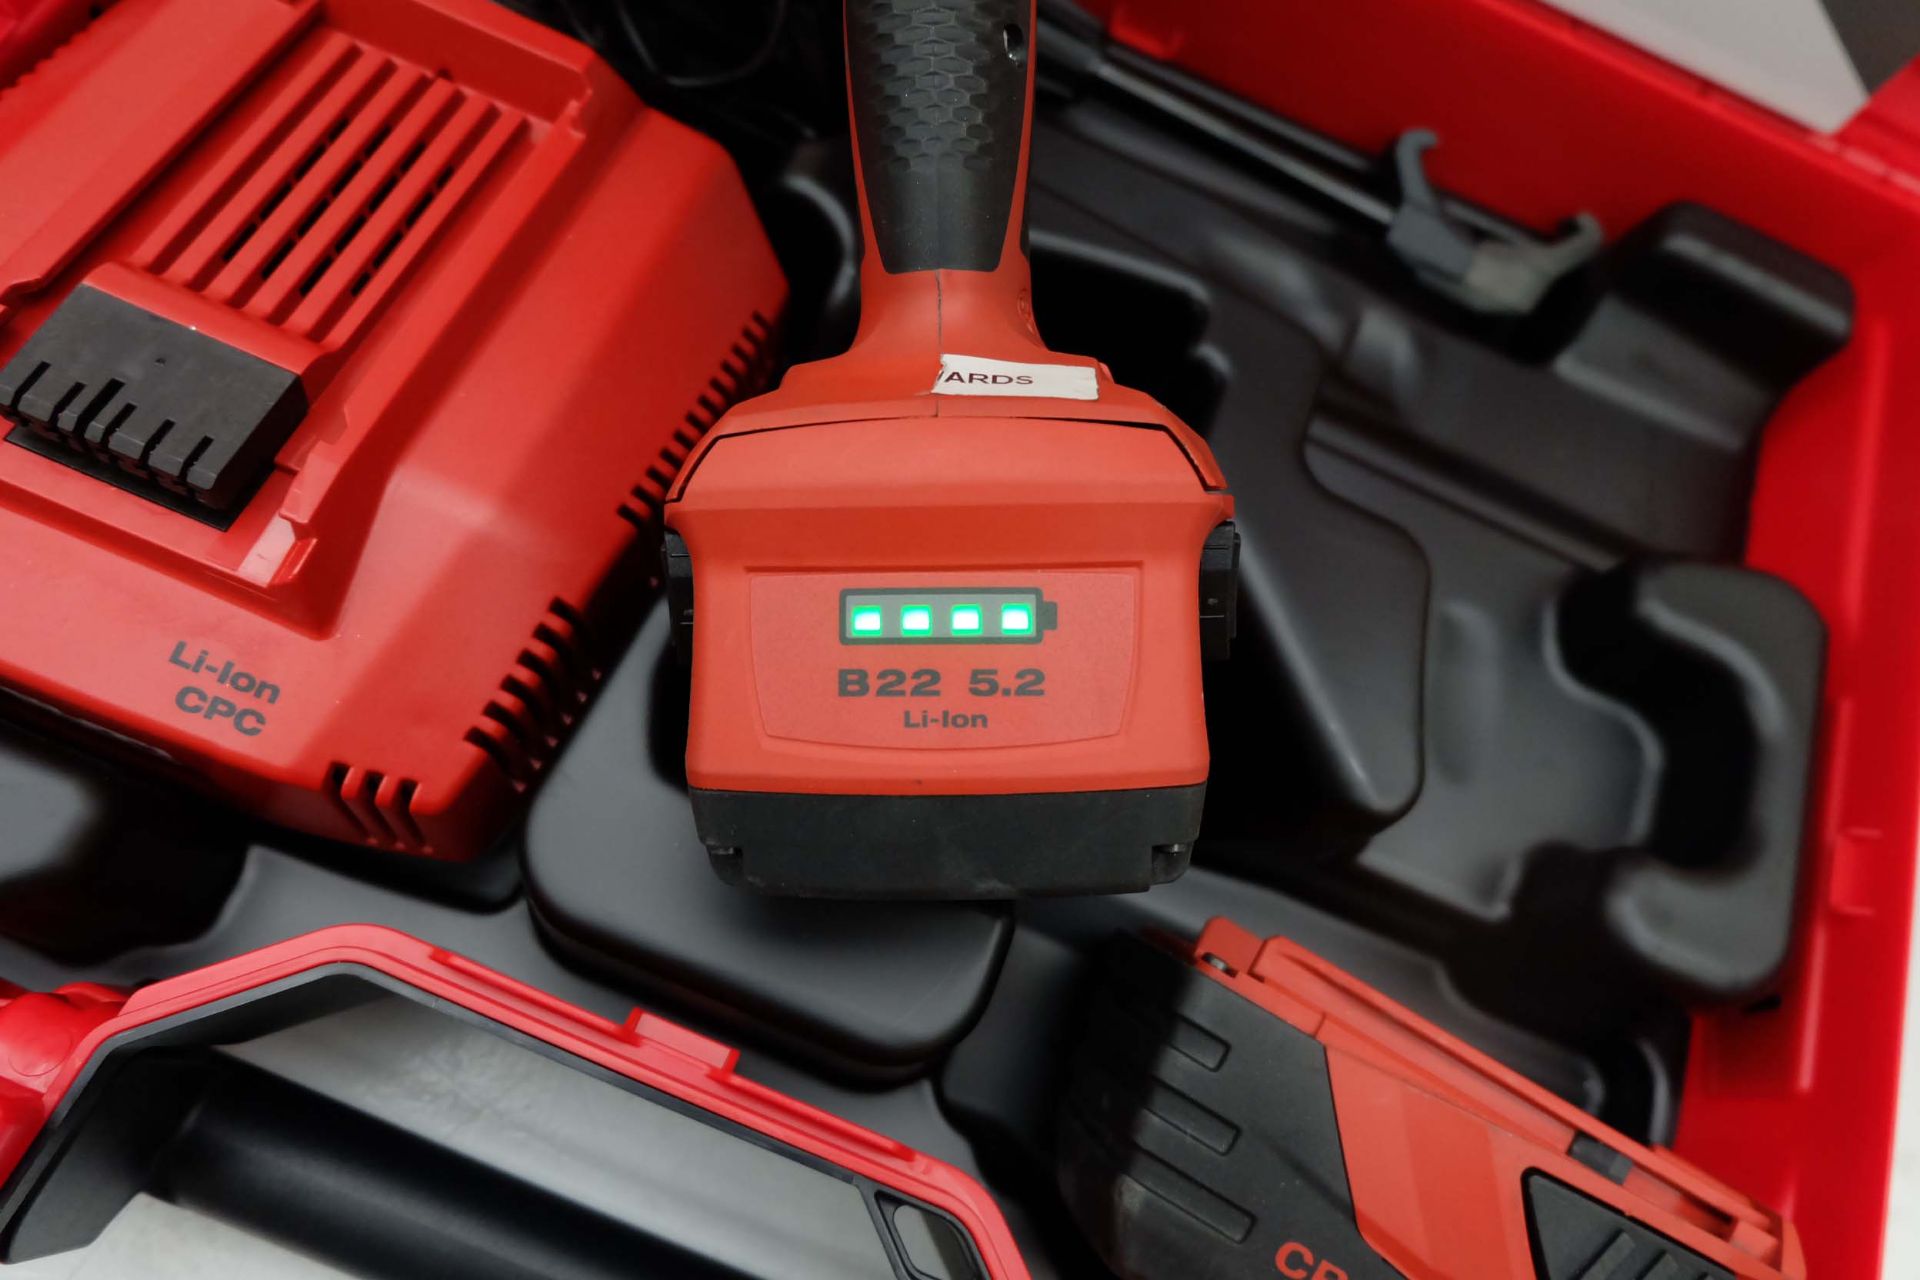 Hilti Model SF 6-A22 Cordless Power Drill. 2 x 22V 5.2Ah Batteries. 240V Charger. - Image 6 of 9